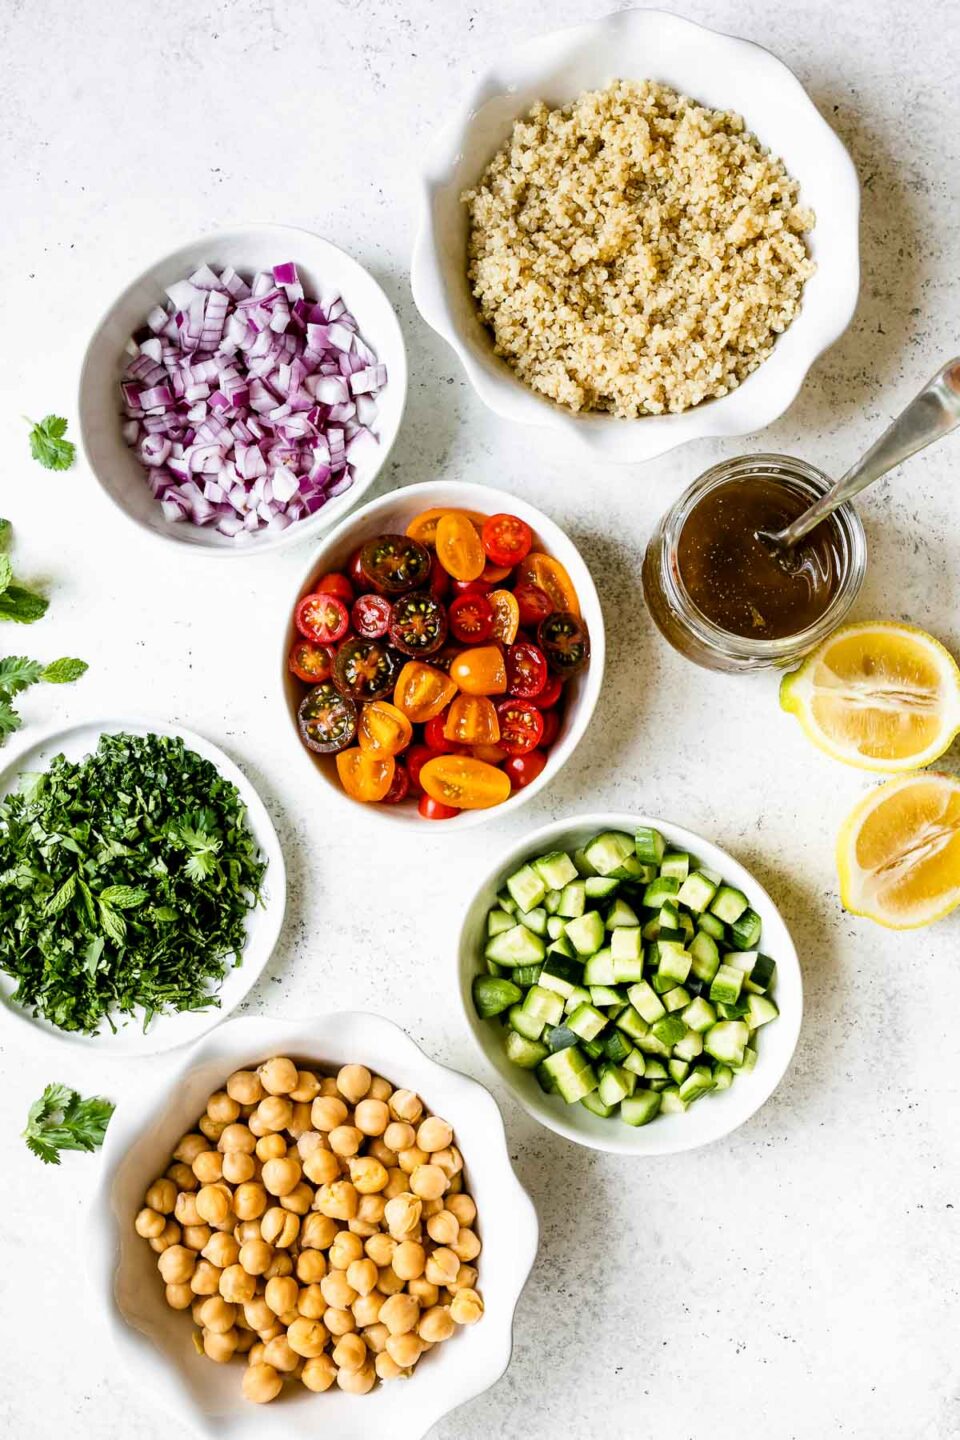 Quinoa salad ingredients in individual small bowls, arranged on a white surface - red onion, quinoa, tomatoes, salad dressing, lemon, cucumber, chickpeas & fresh herbs.